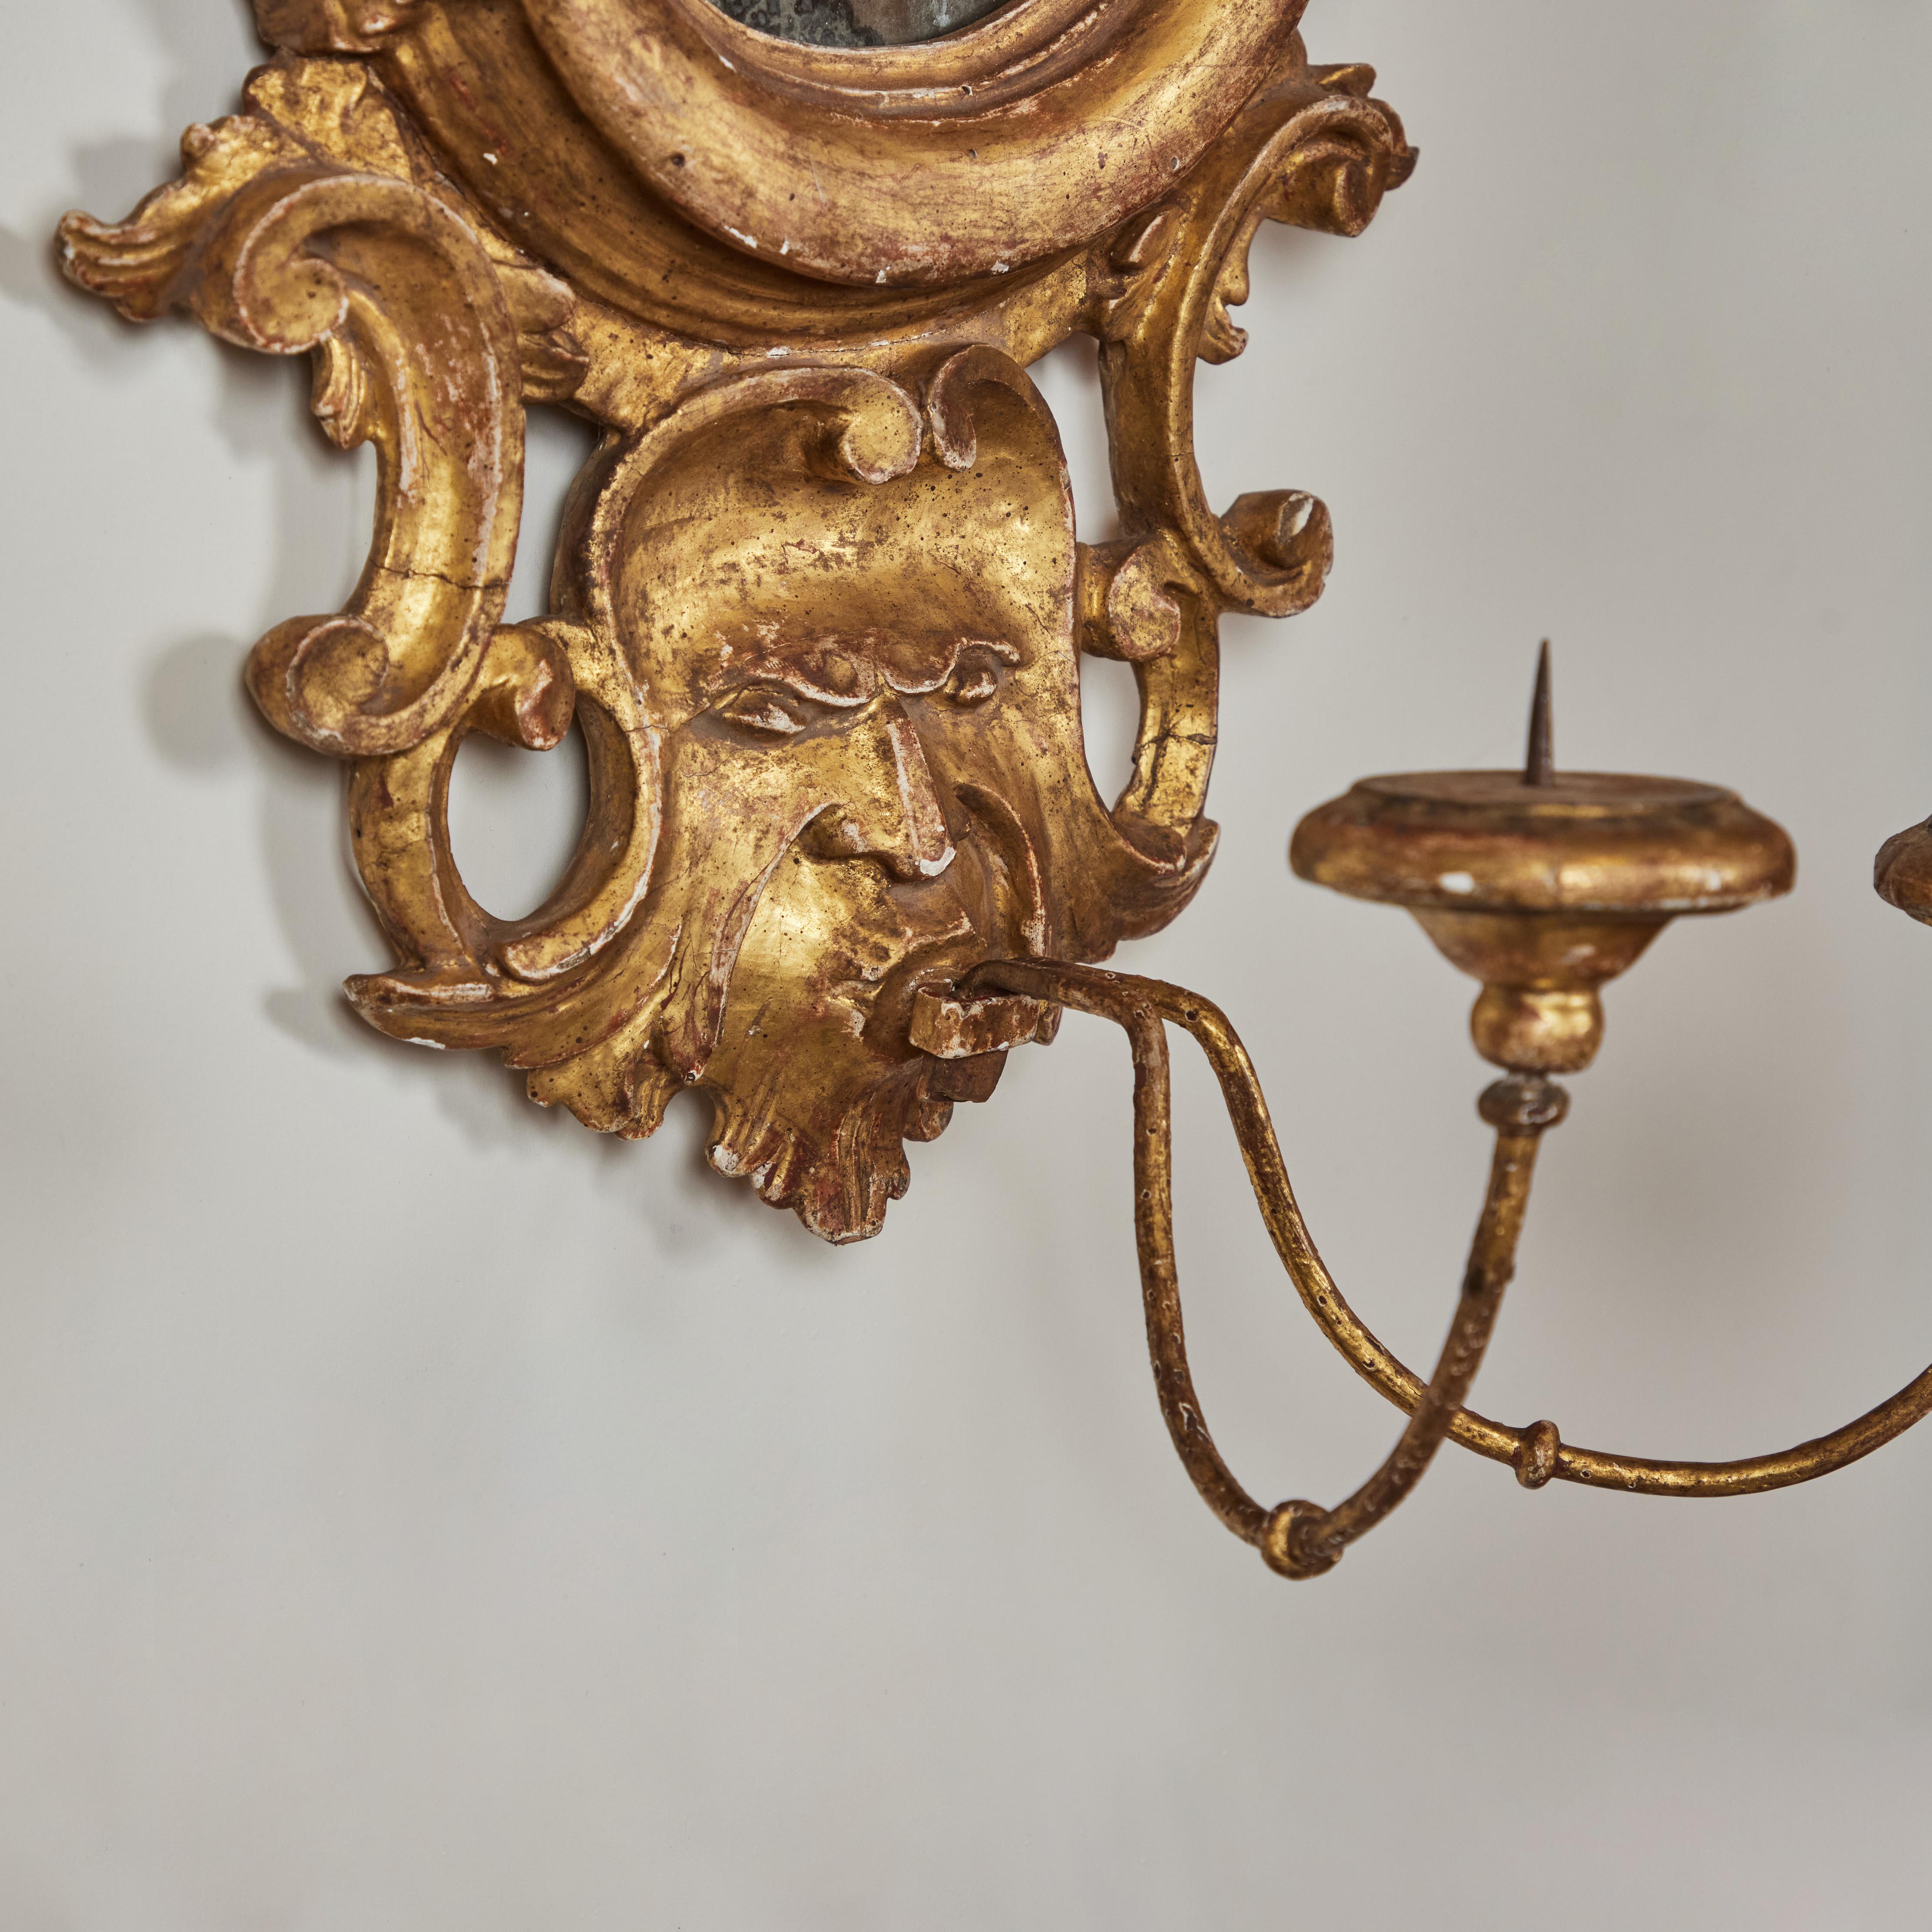 Gilded Florentine Mirrors with Candle Holders In Good Condition For Sale In Newport Beach, CA